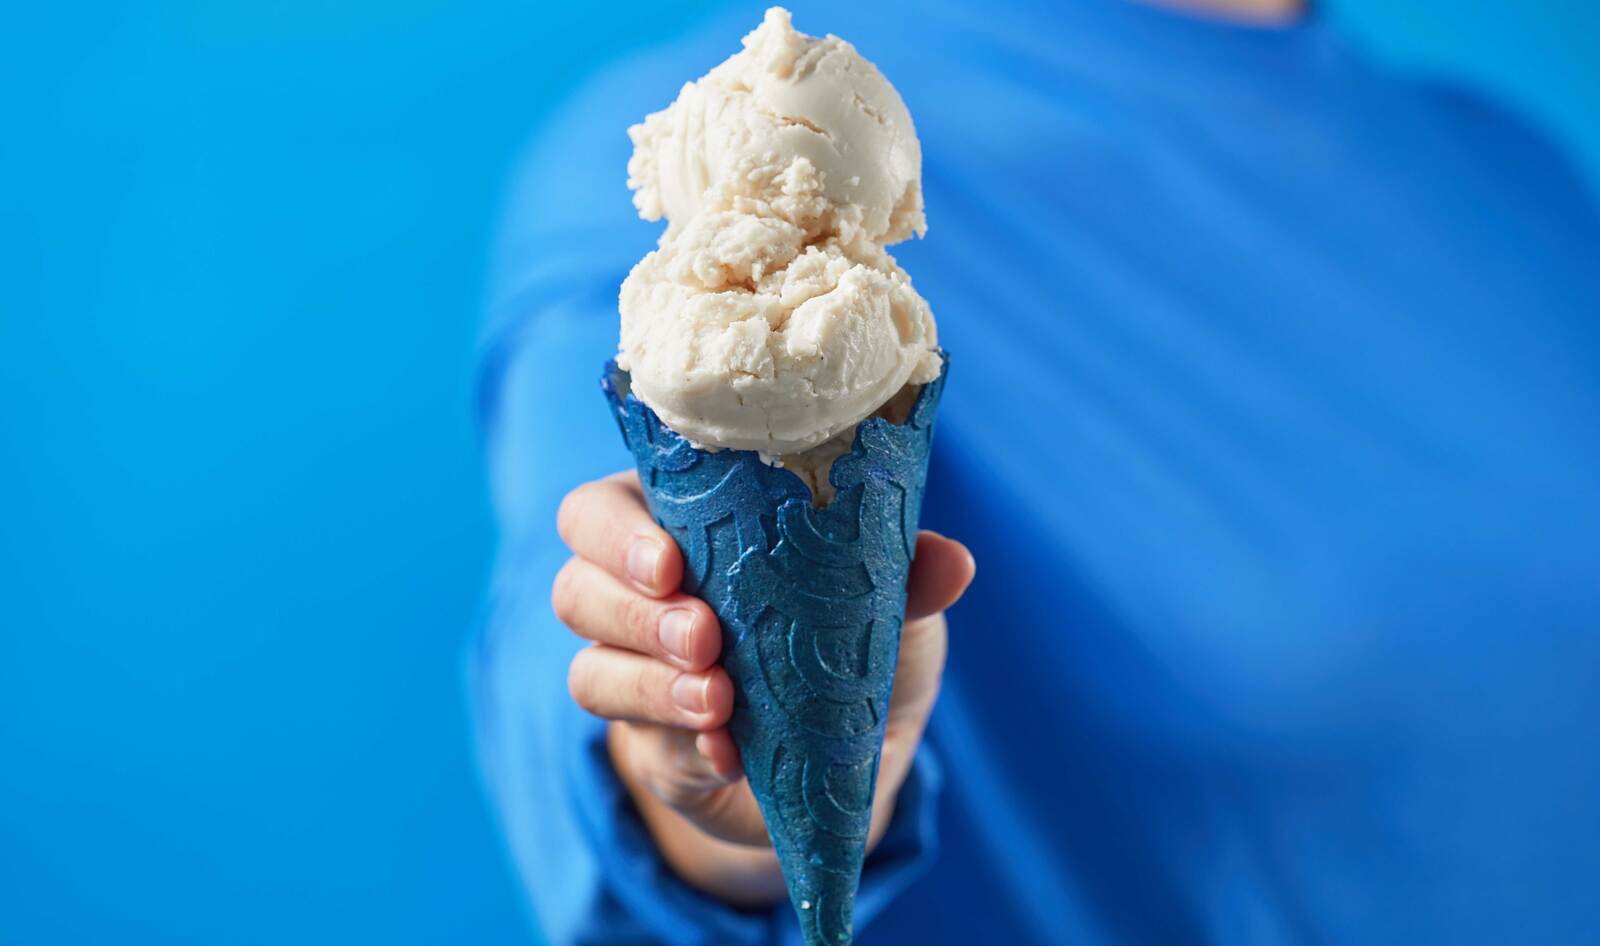 Next-Level Vegan Ice Cream Is Coming to Southern California Scoop Shops